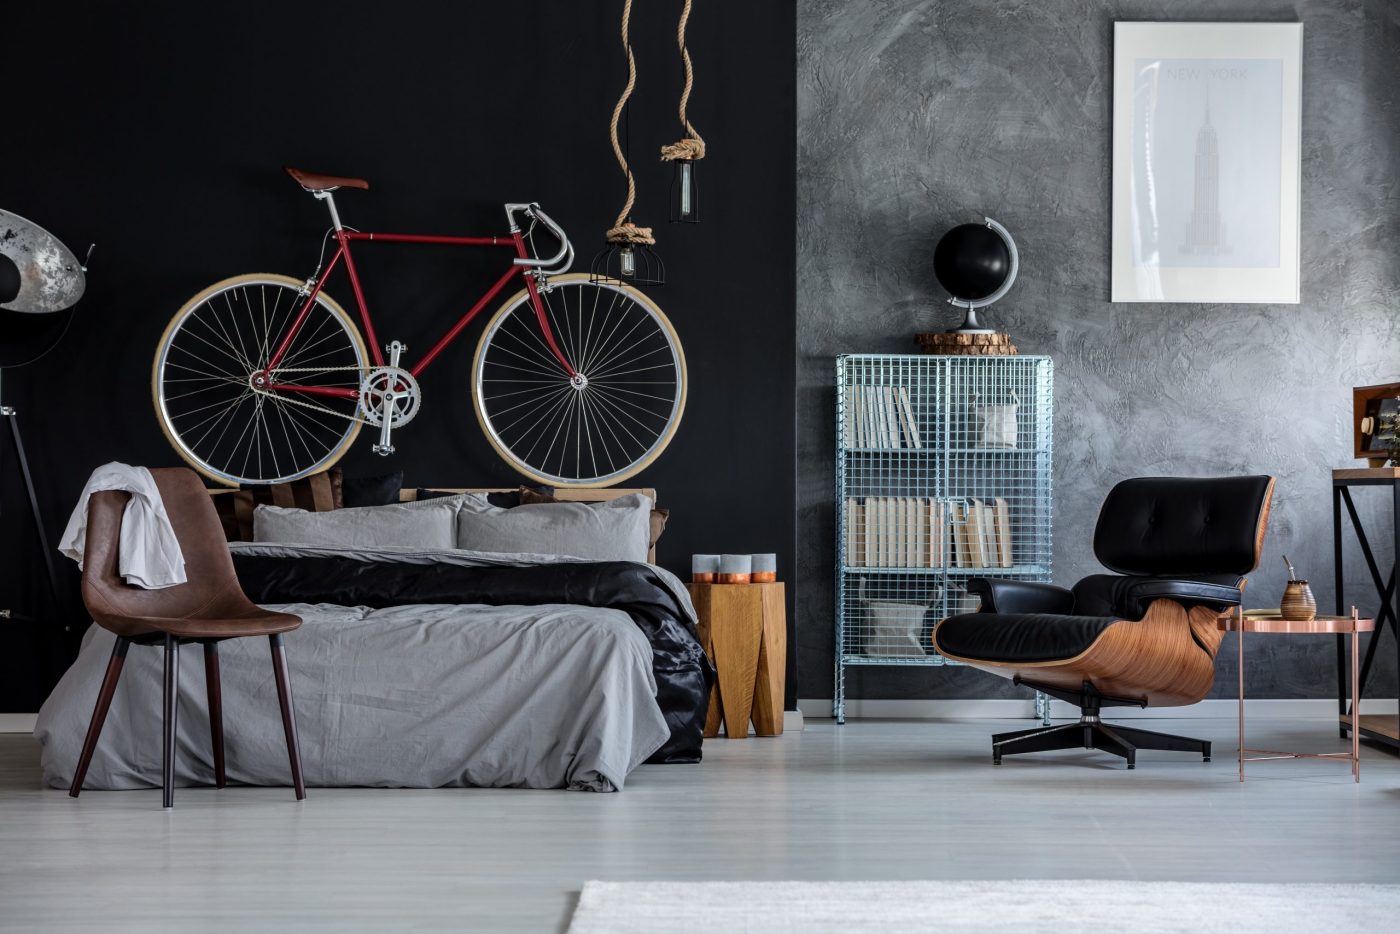 bedroom-with-bicycle-PRM6MYX-scaled.jpg